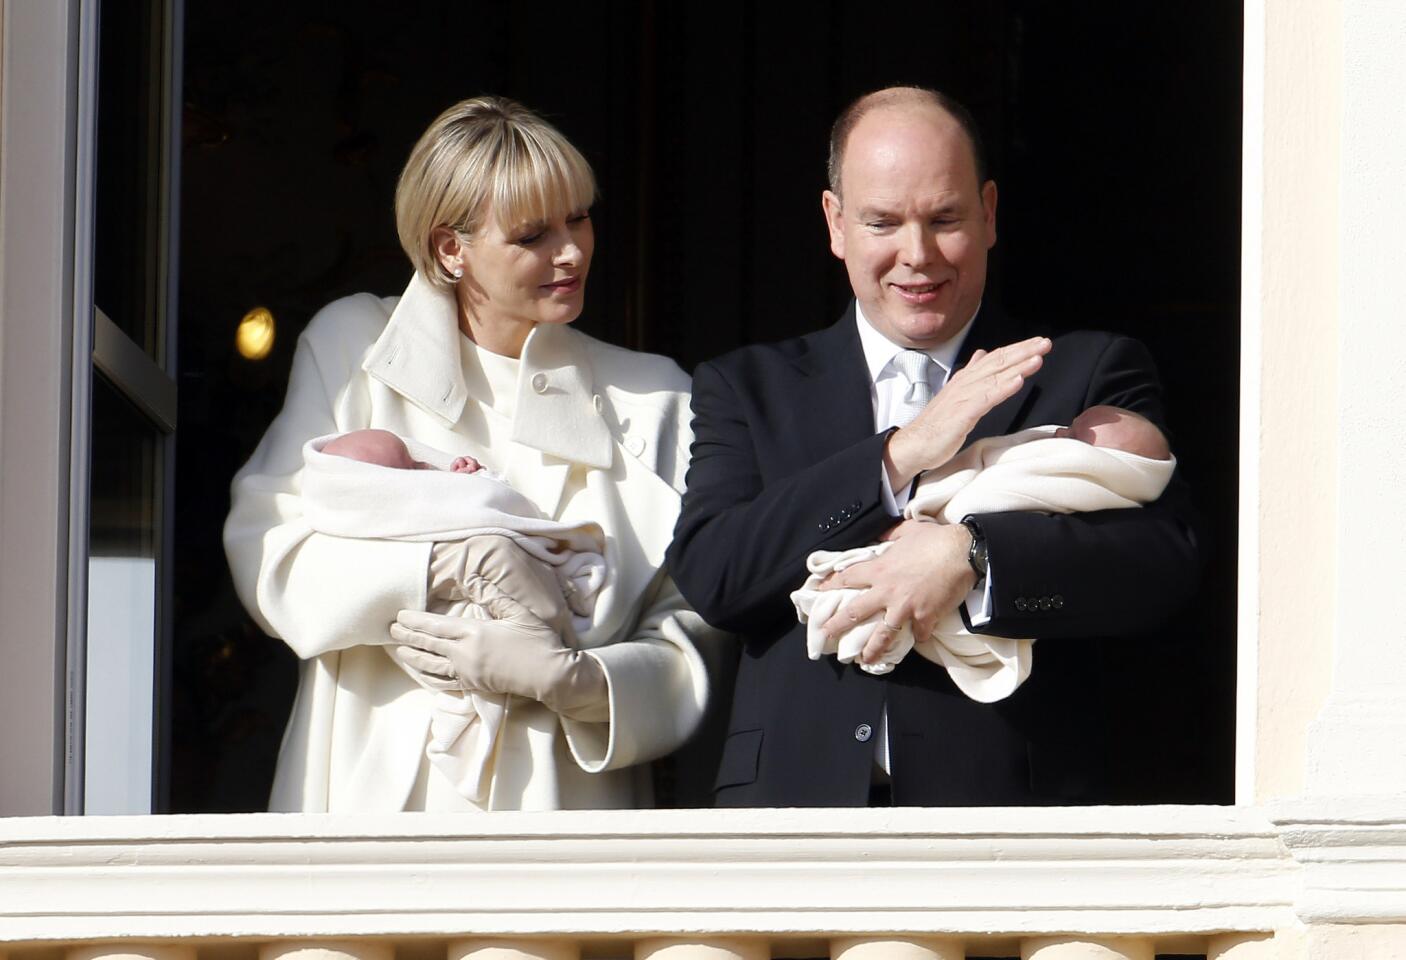 Prince Albert II of Monaco and his wife Princess Charlene appear on the balcony of the Monaco Palace with their newborn twins Prince Jacques and Princess Gabriella on January 7, 2015 in Monaco.